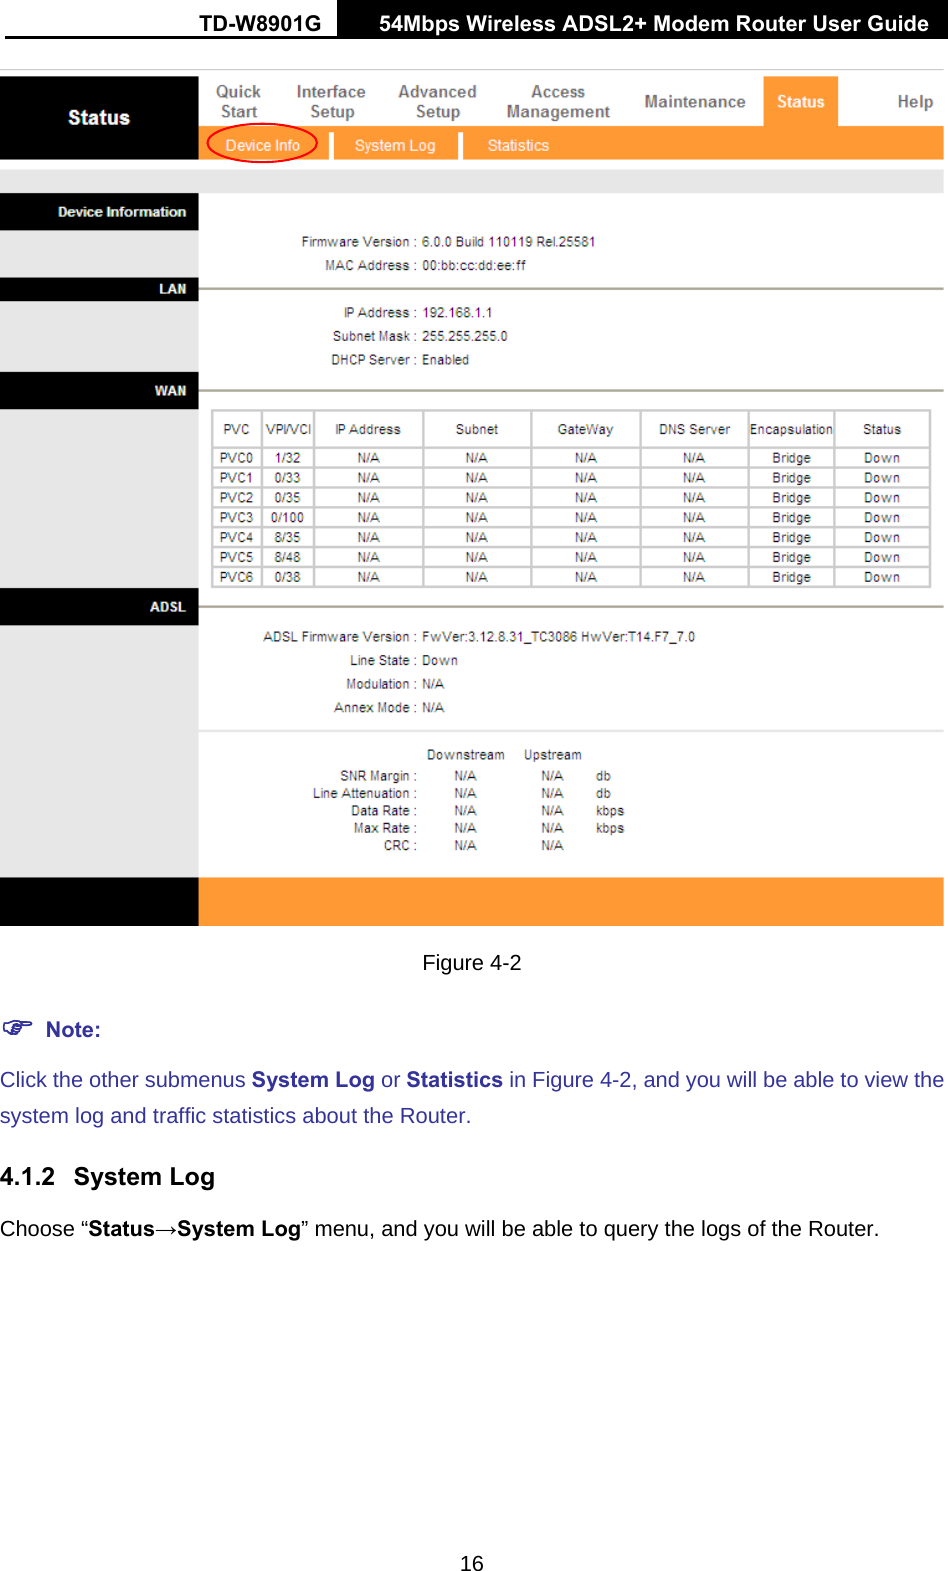 TD-W8901G   54Mbps Wireless ADSL2+ Modem Router User Guide 16  Figure 4-2 ) Note: Click the other submenus System Log or Statistics in Figure 4-2, and you will be able to view the system log and traffic statistics about the Router. 4.1.2 System Log Choose “Status→System Log” menu, and you will be able to query the logs of the Router. 